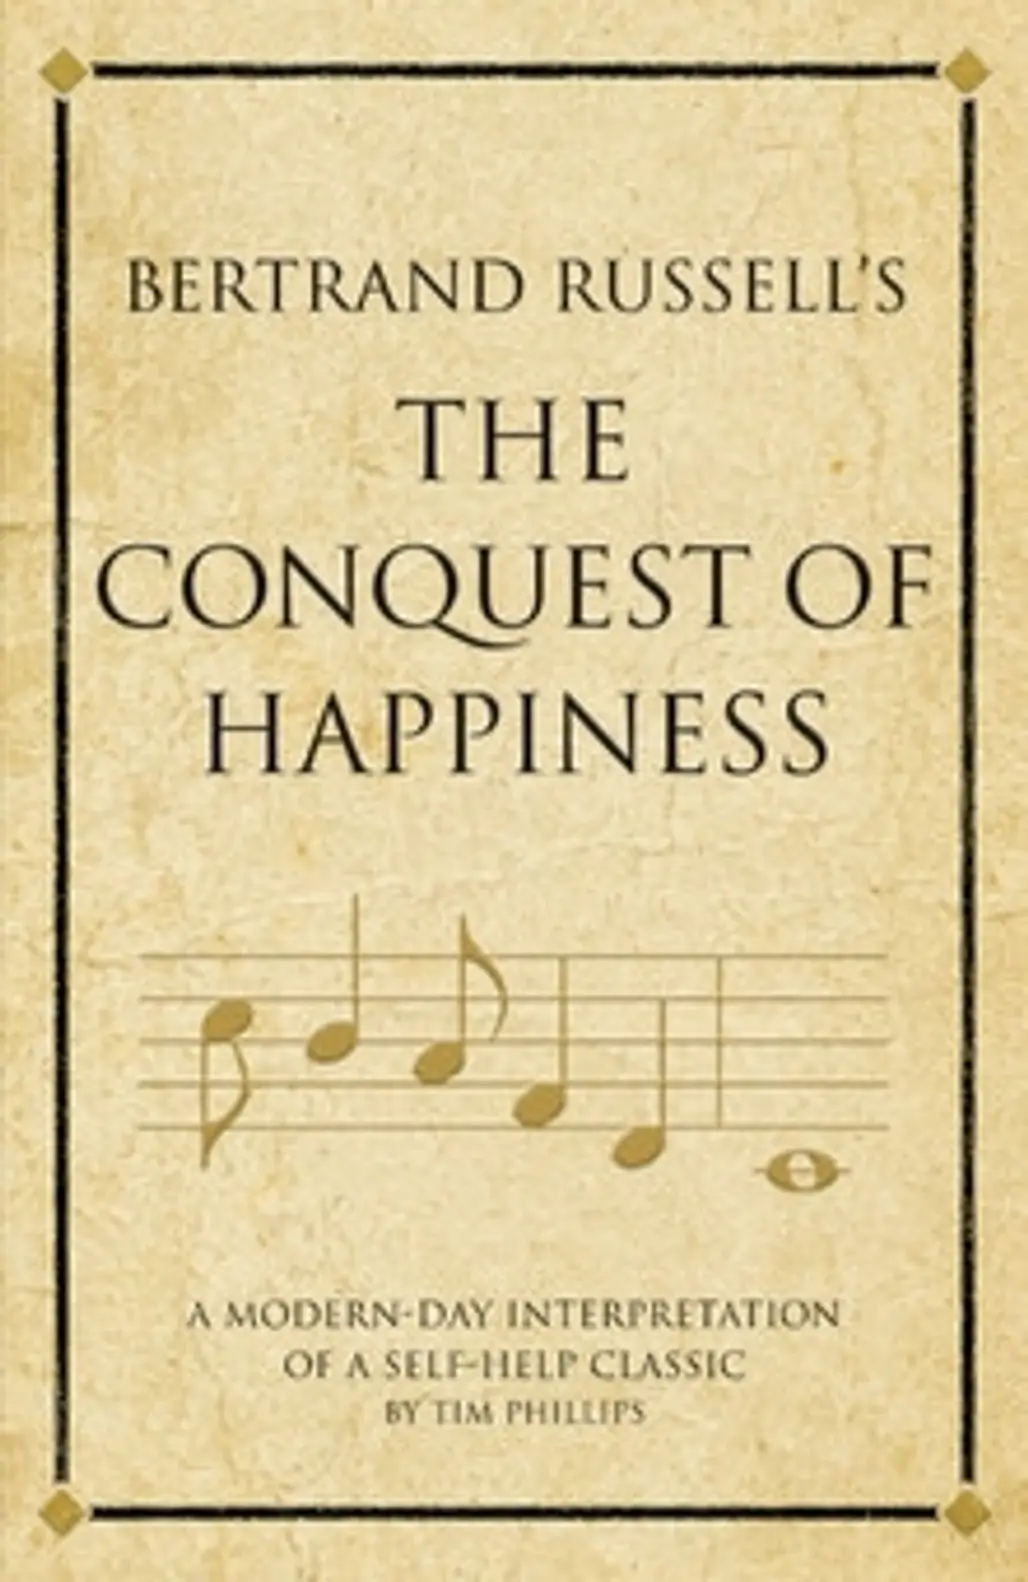 Bertrand Russell – the Conquest of Happiness